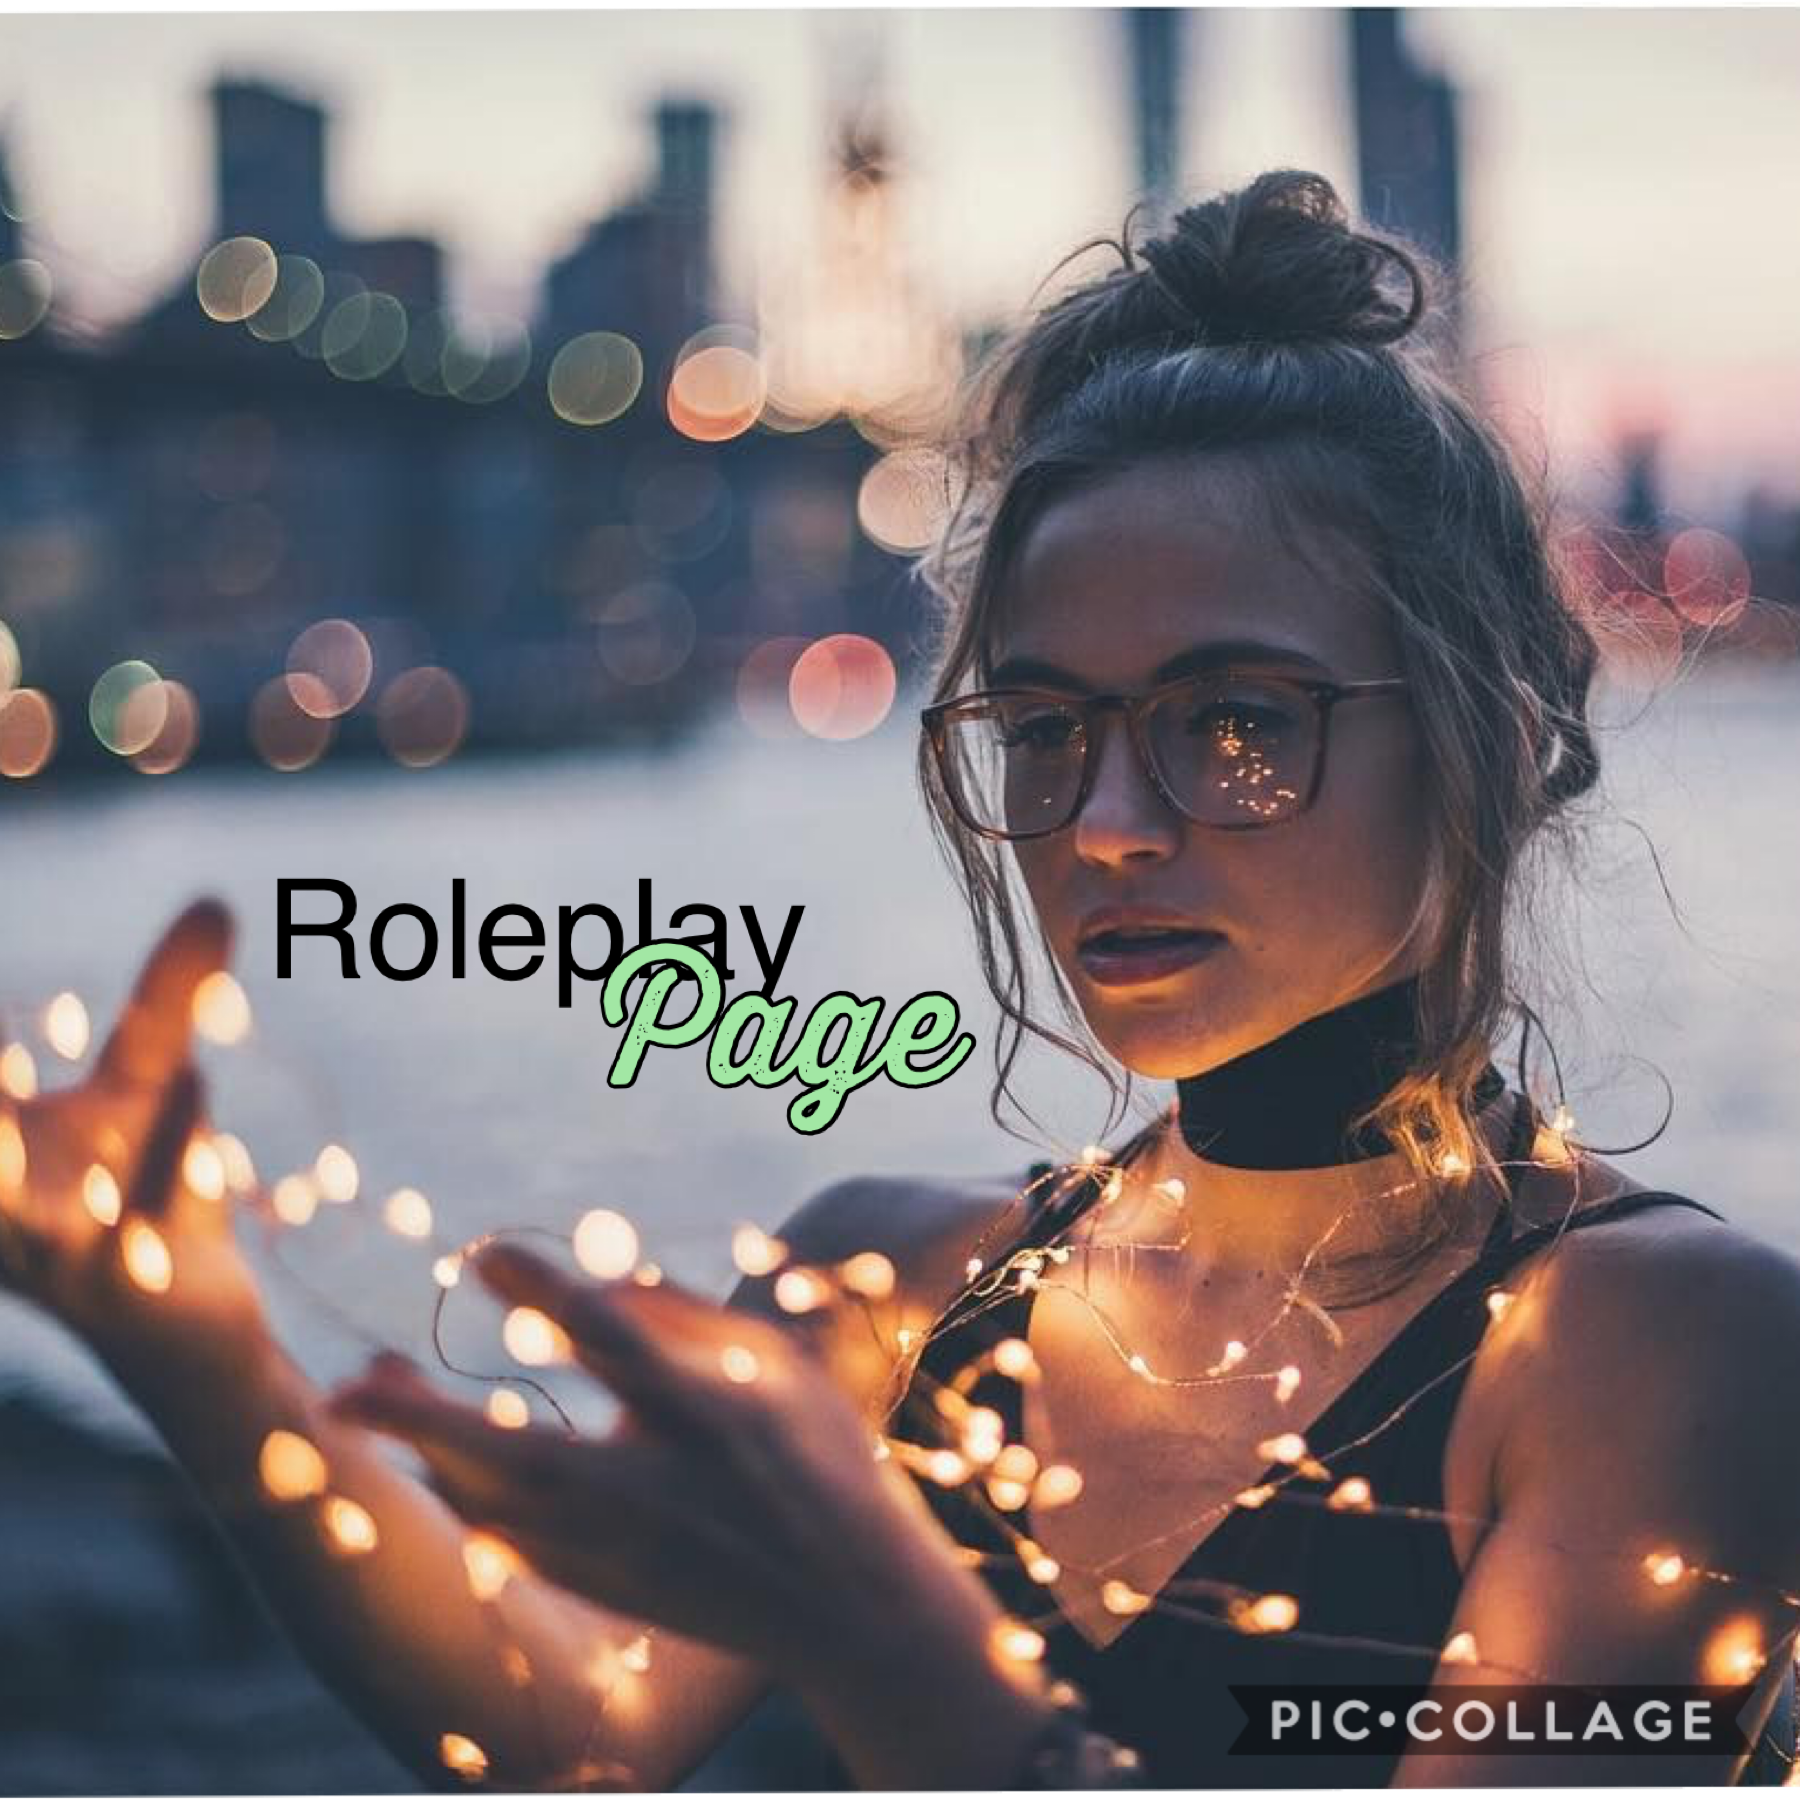 Roleplay page